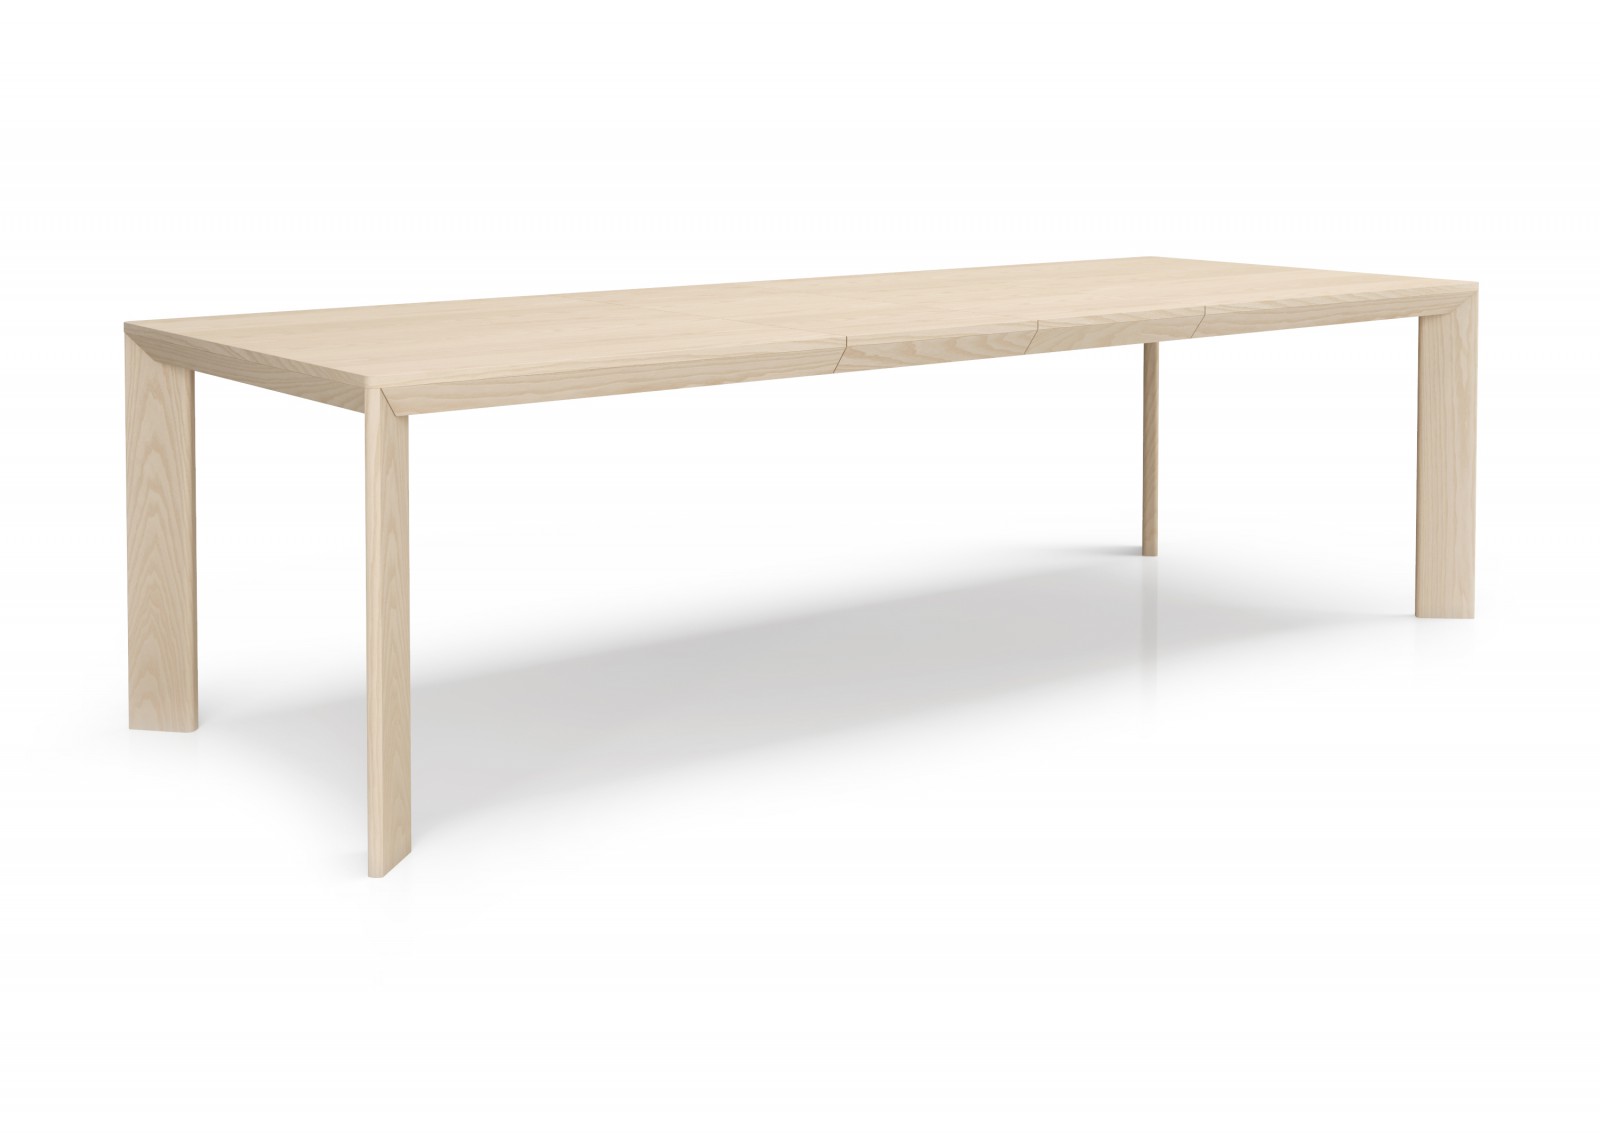 72'' Double extension table